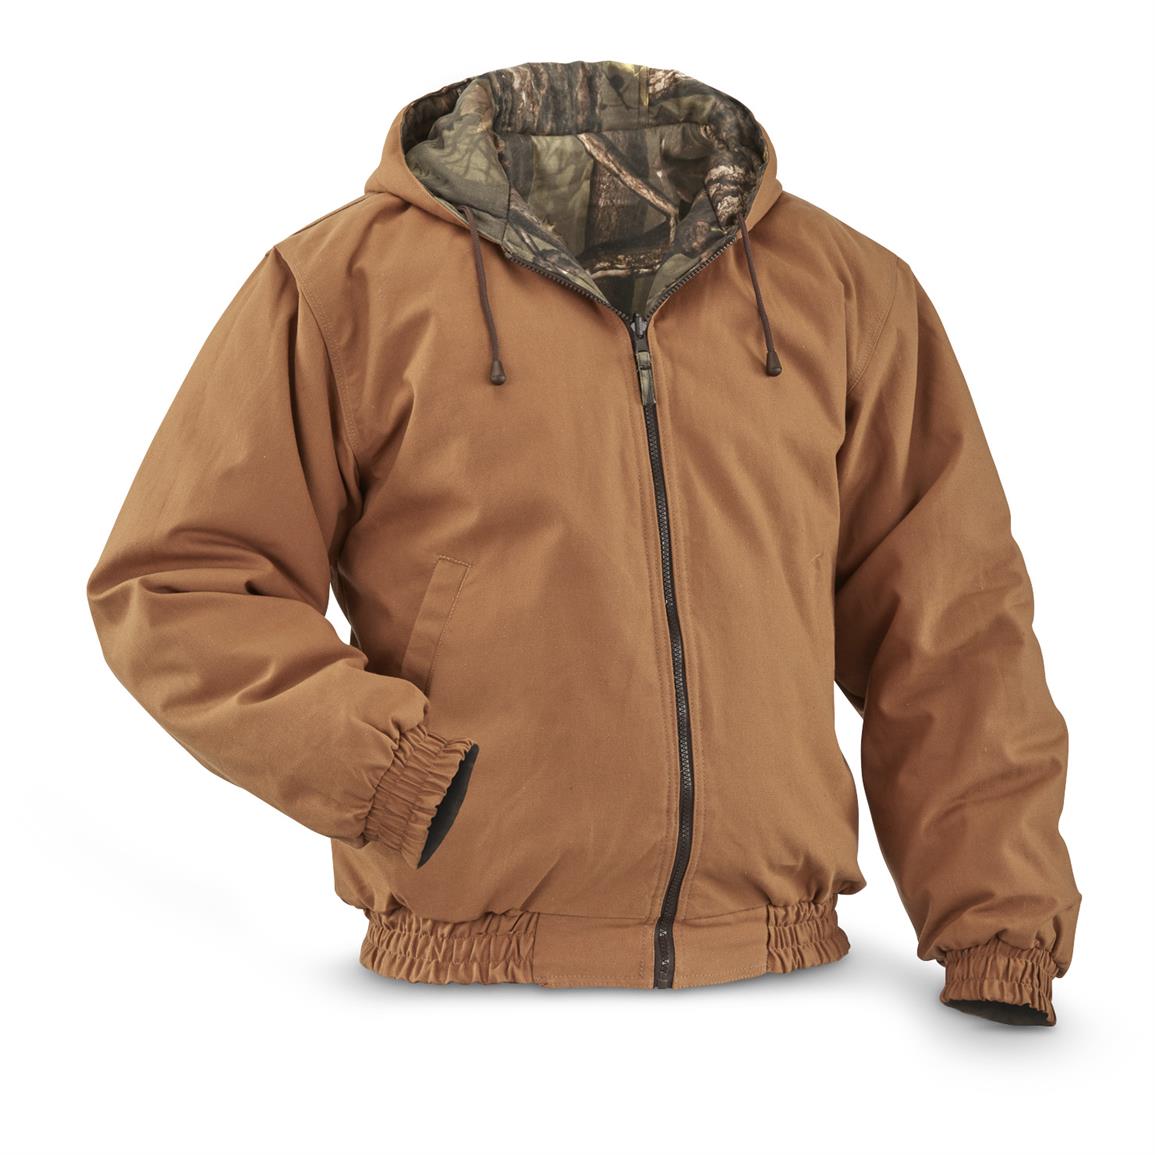 Reversible Canvas Insulated Jacket - 656509, Camo Jackets at Sportsman